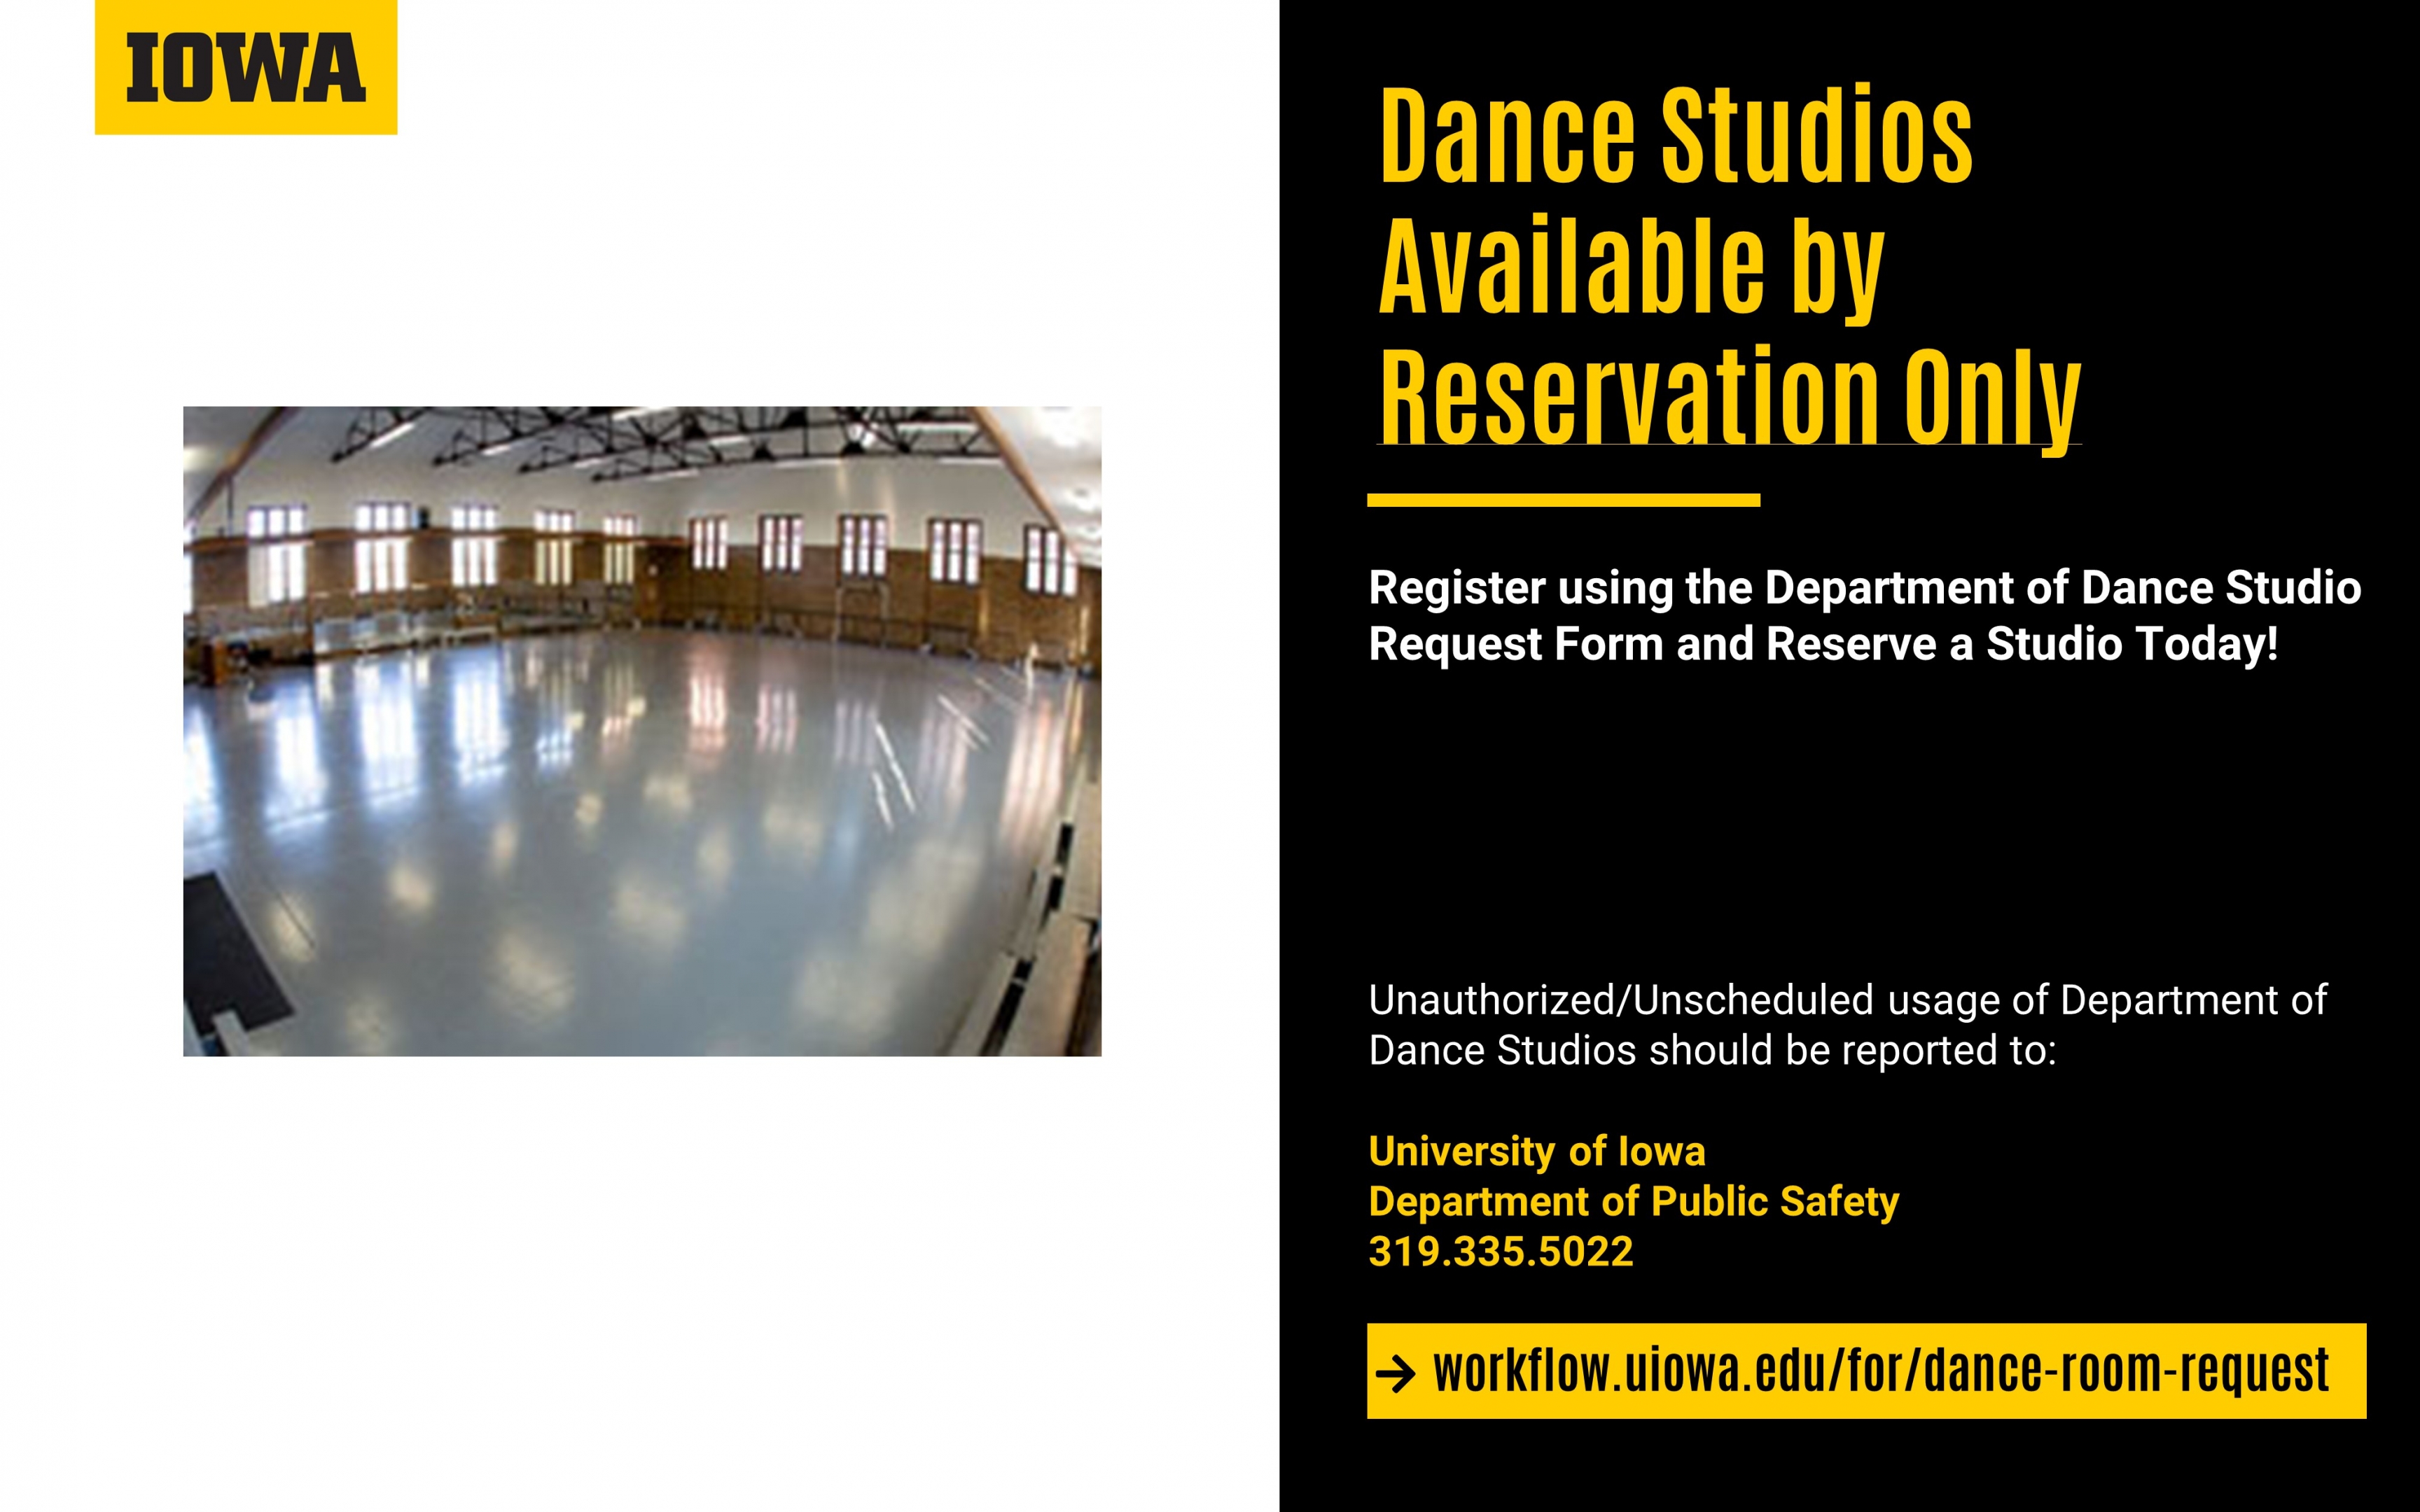 Dance Studios available by reservation only. Visit dance.uiowa.edu to reserve.